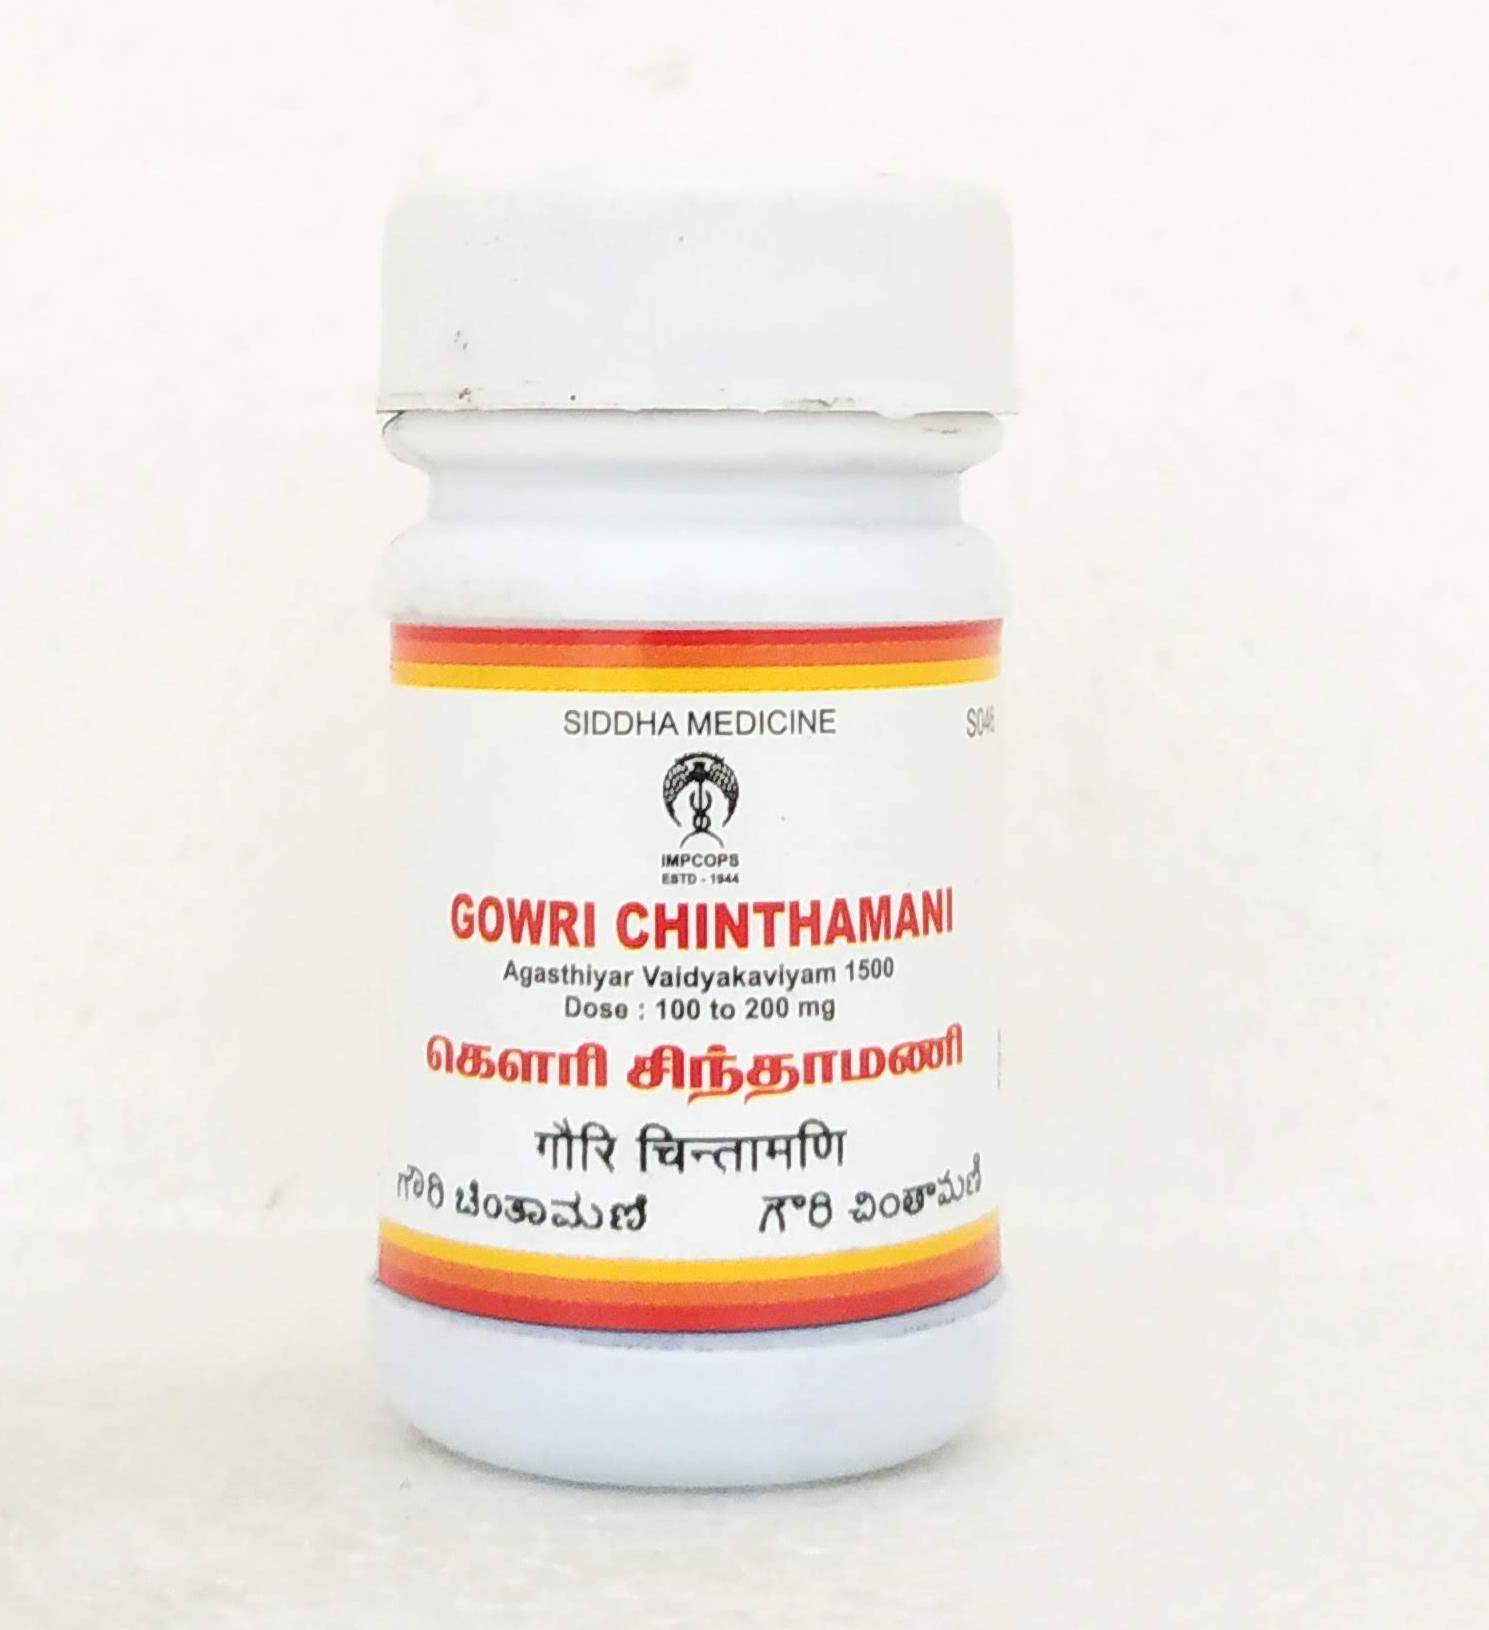 Shop Gowri chinthamani 10gm at price 171.00 from Impcops Online - Ayush Care